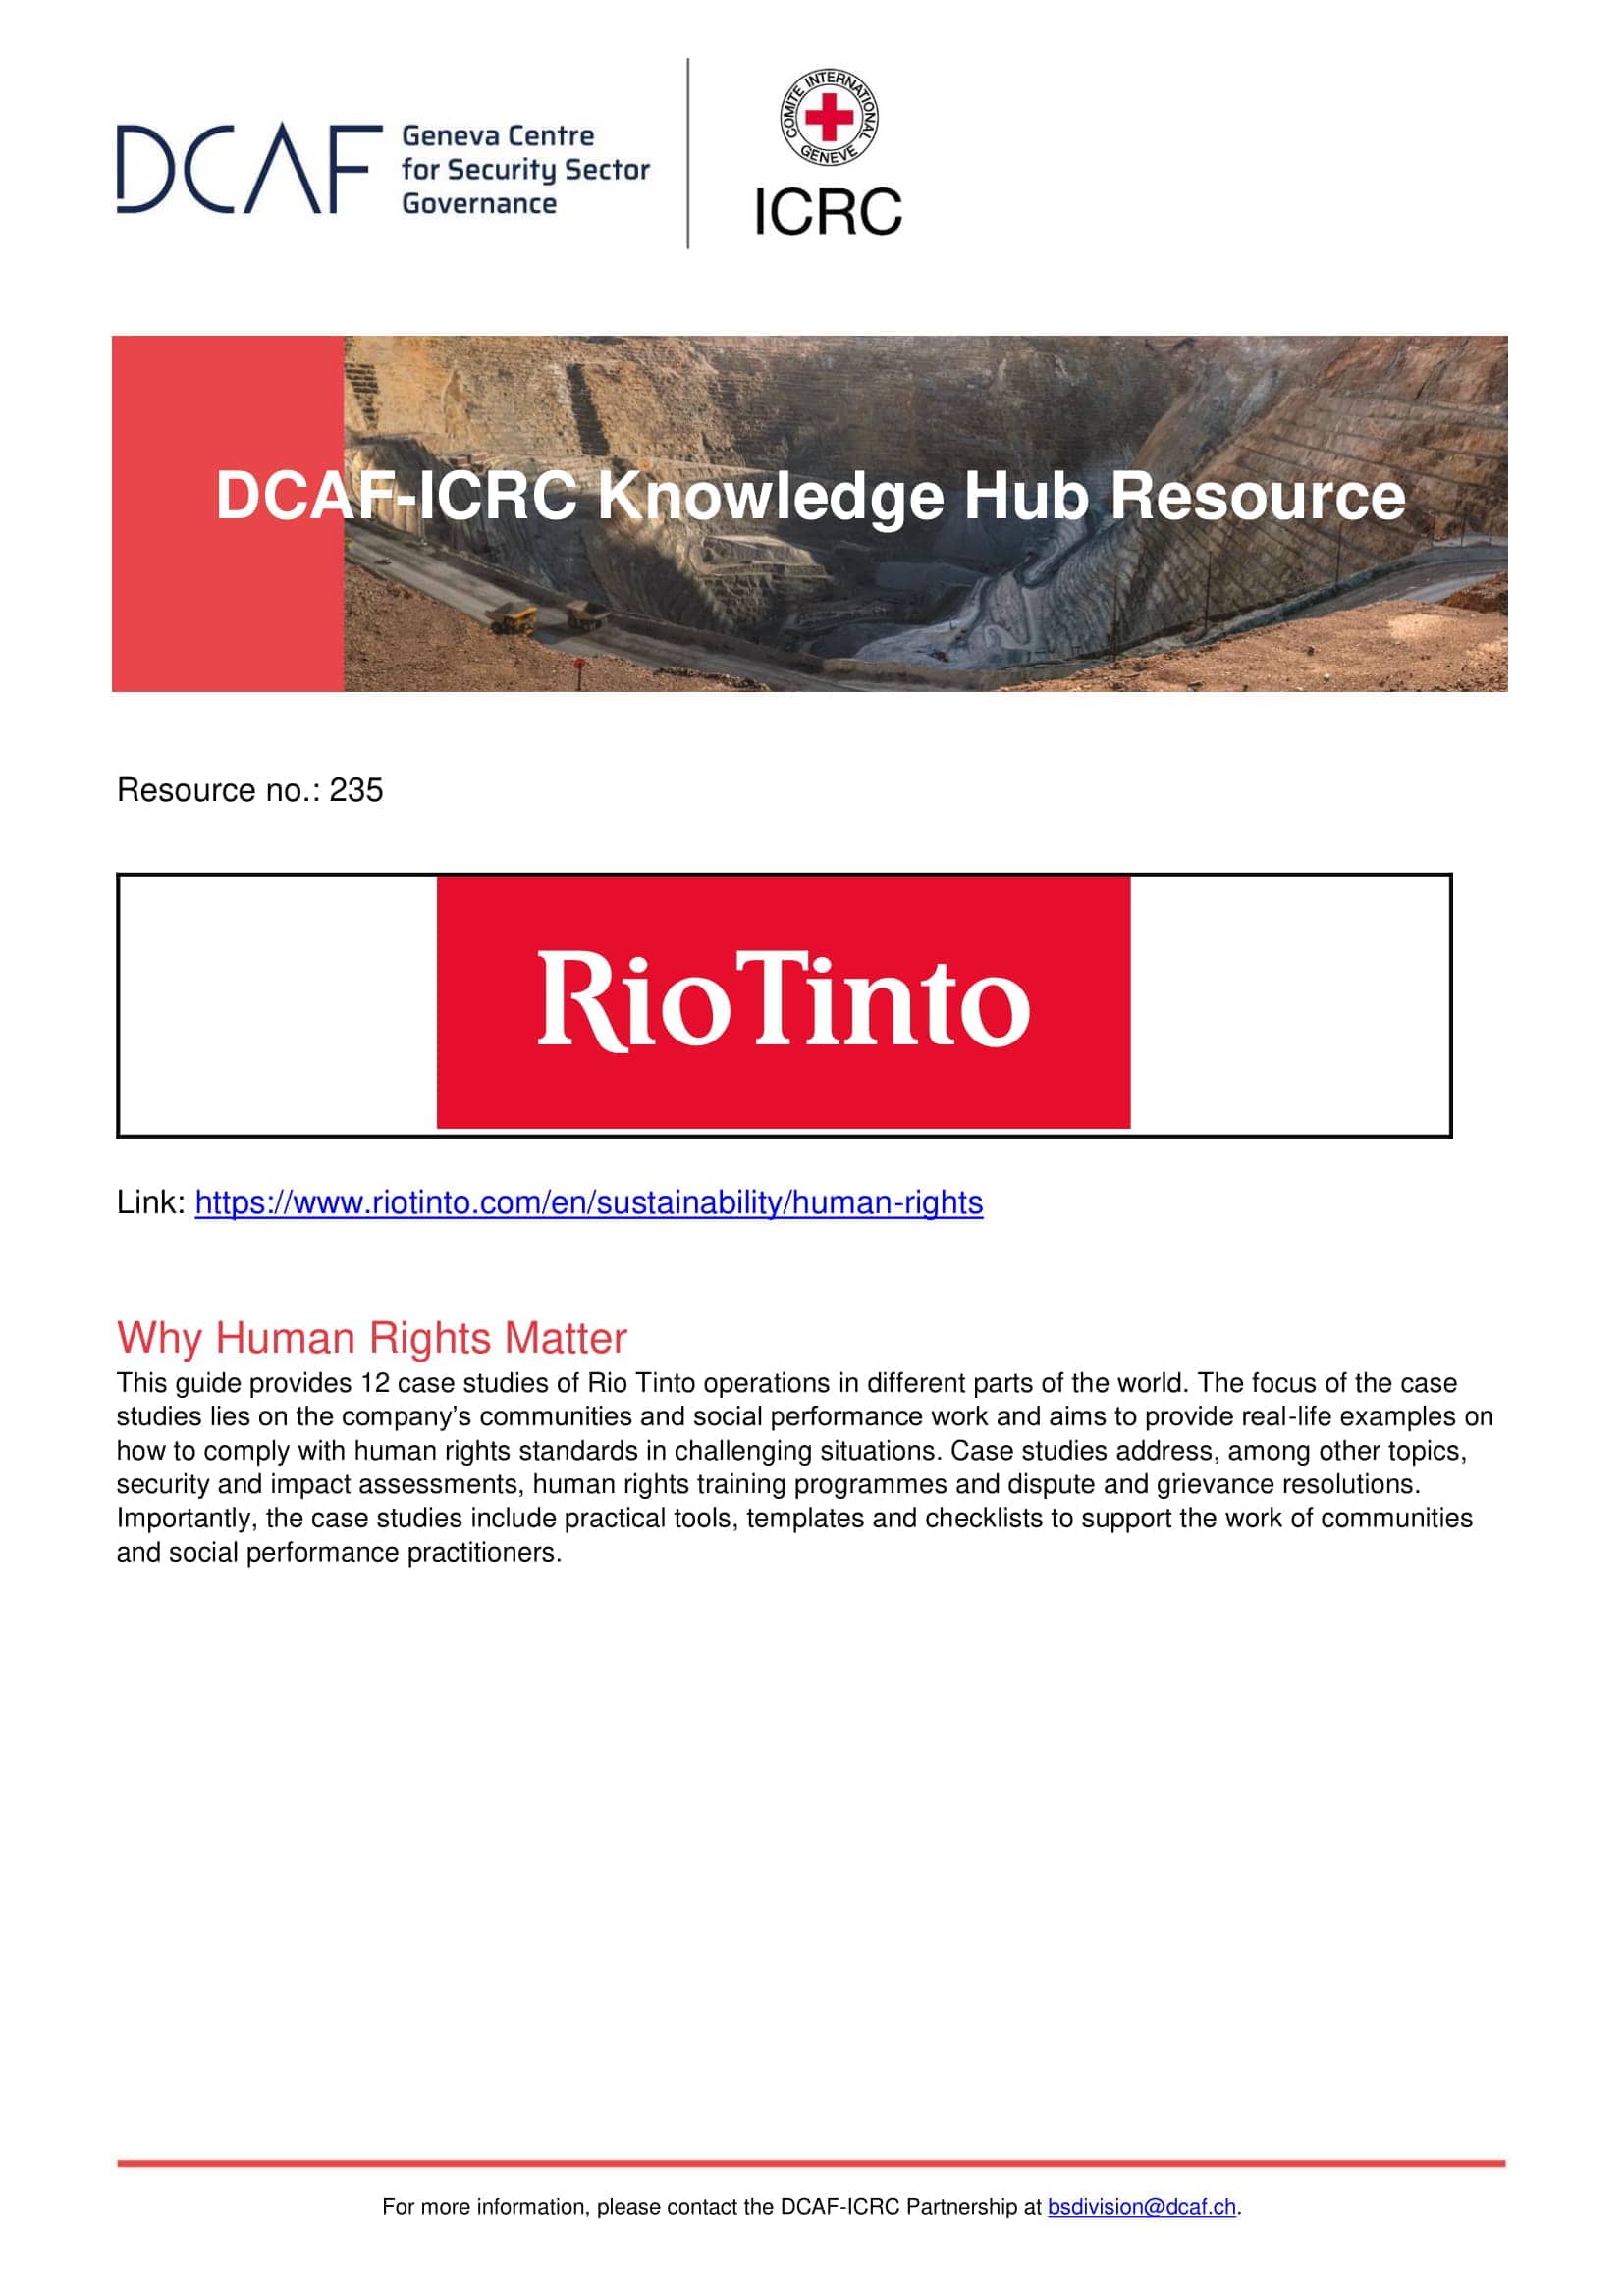 Why Human Rights Matter (DCAF and ICRC)